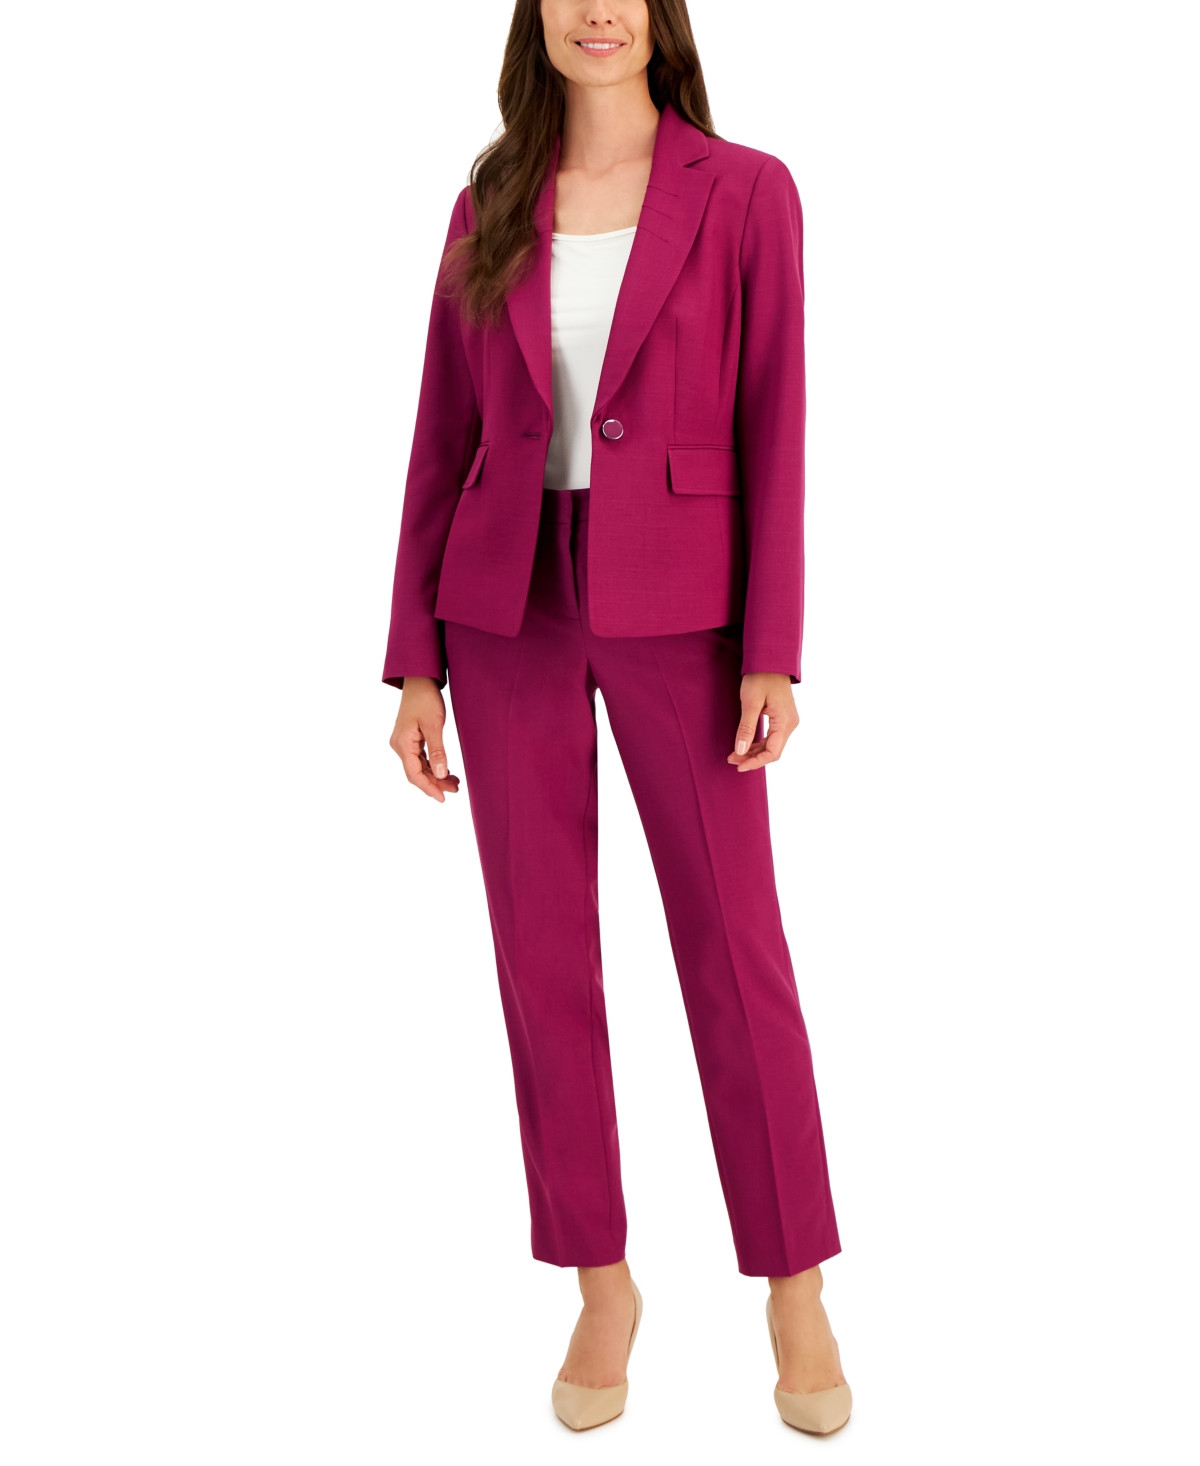 Le Suit Women's Stretch Crepe One-button Pantsuit, Regular & Petite Sizes In Wild Rose